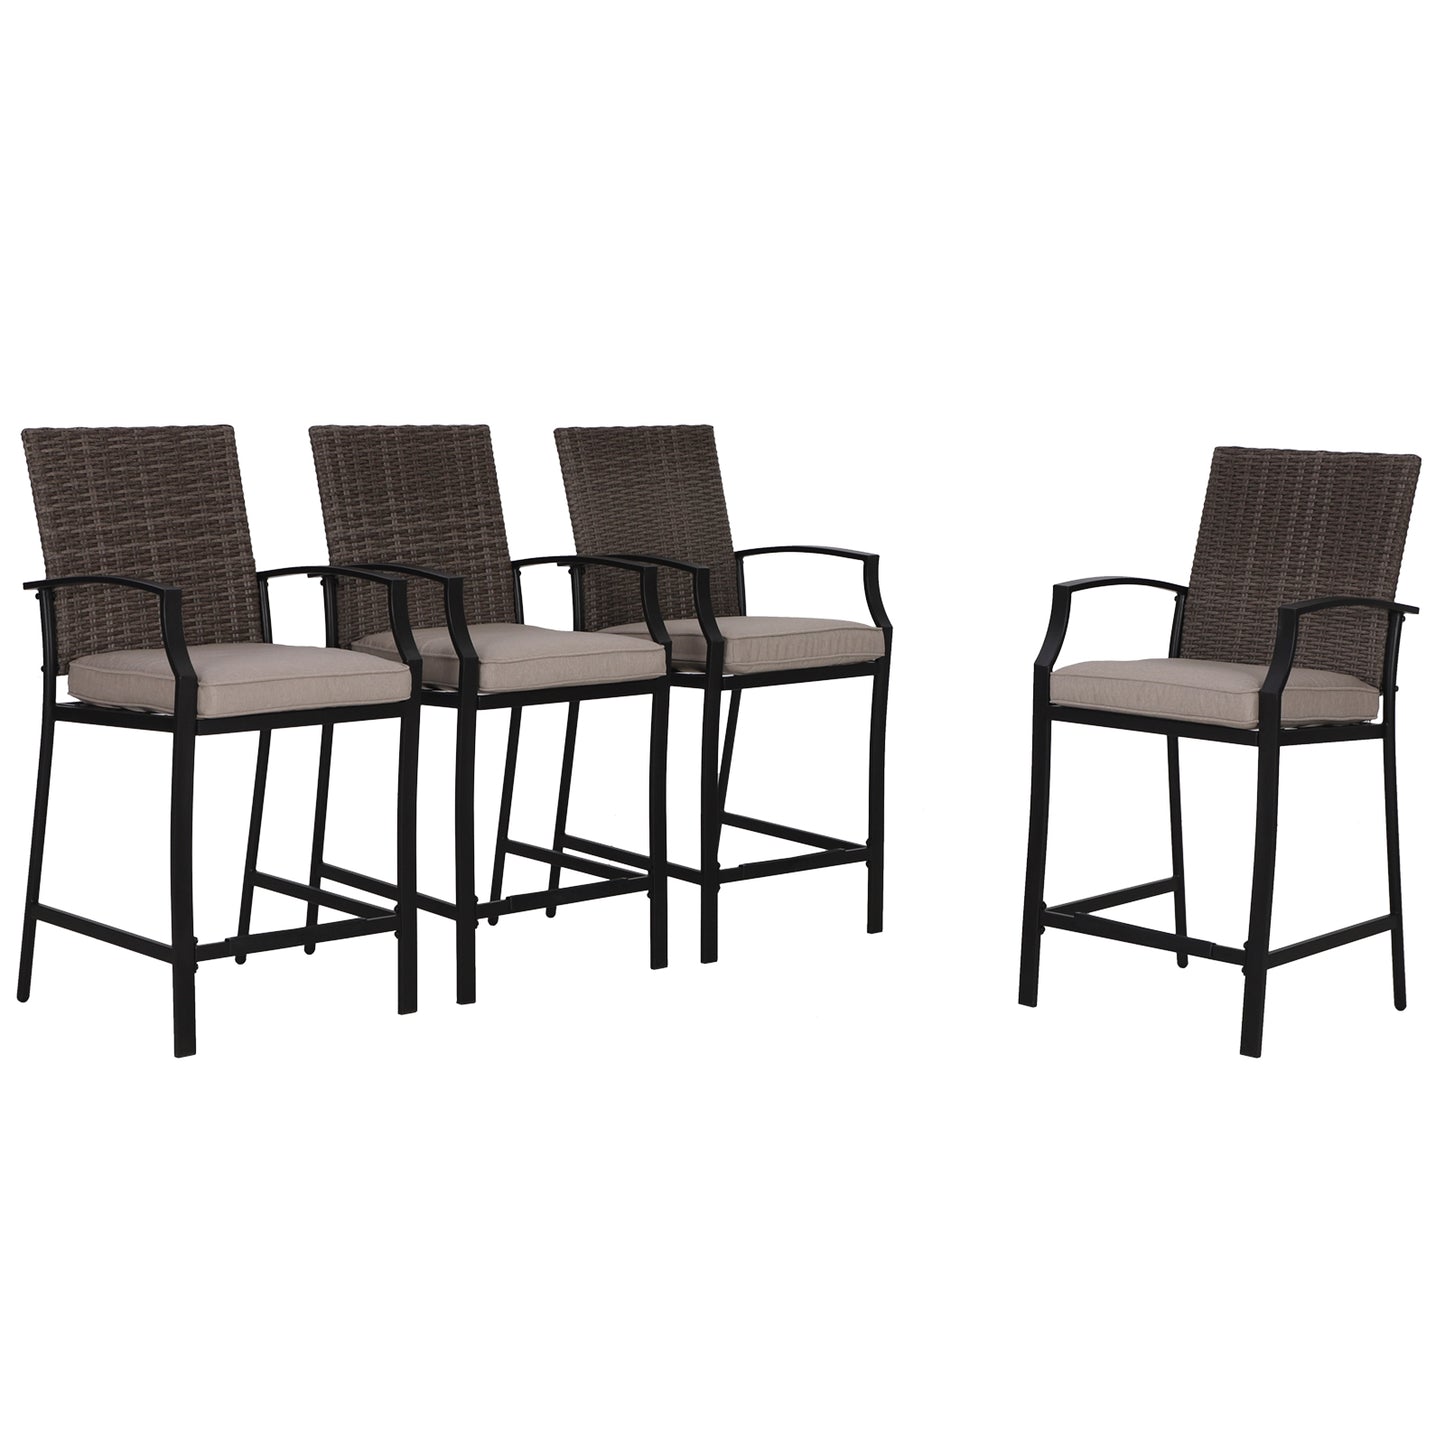 Sophia & William Patio Wicker Rattan Bar Stools Set of 4 with Cushions - Brown